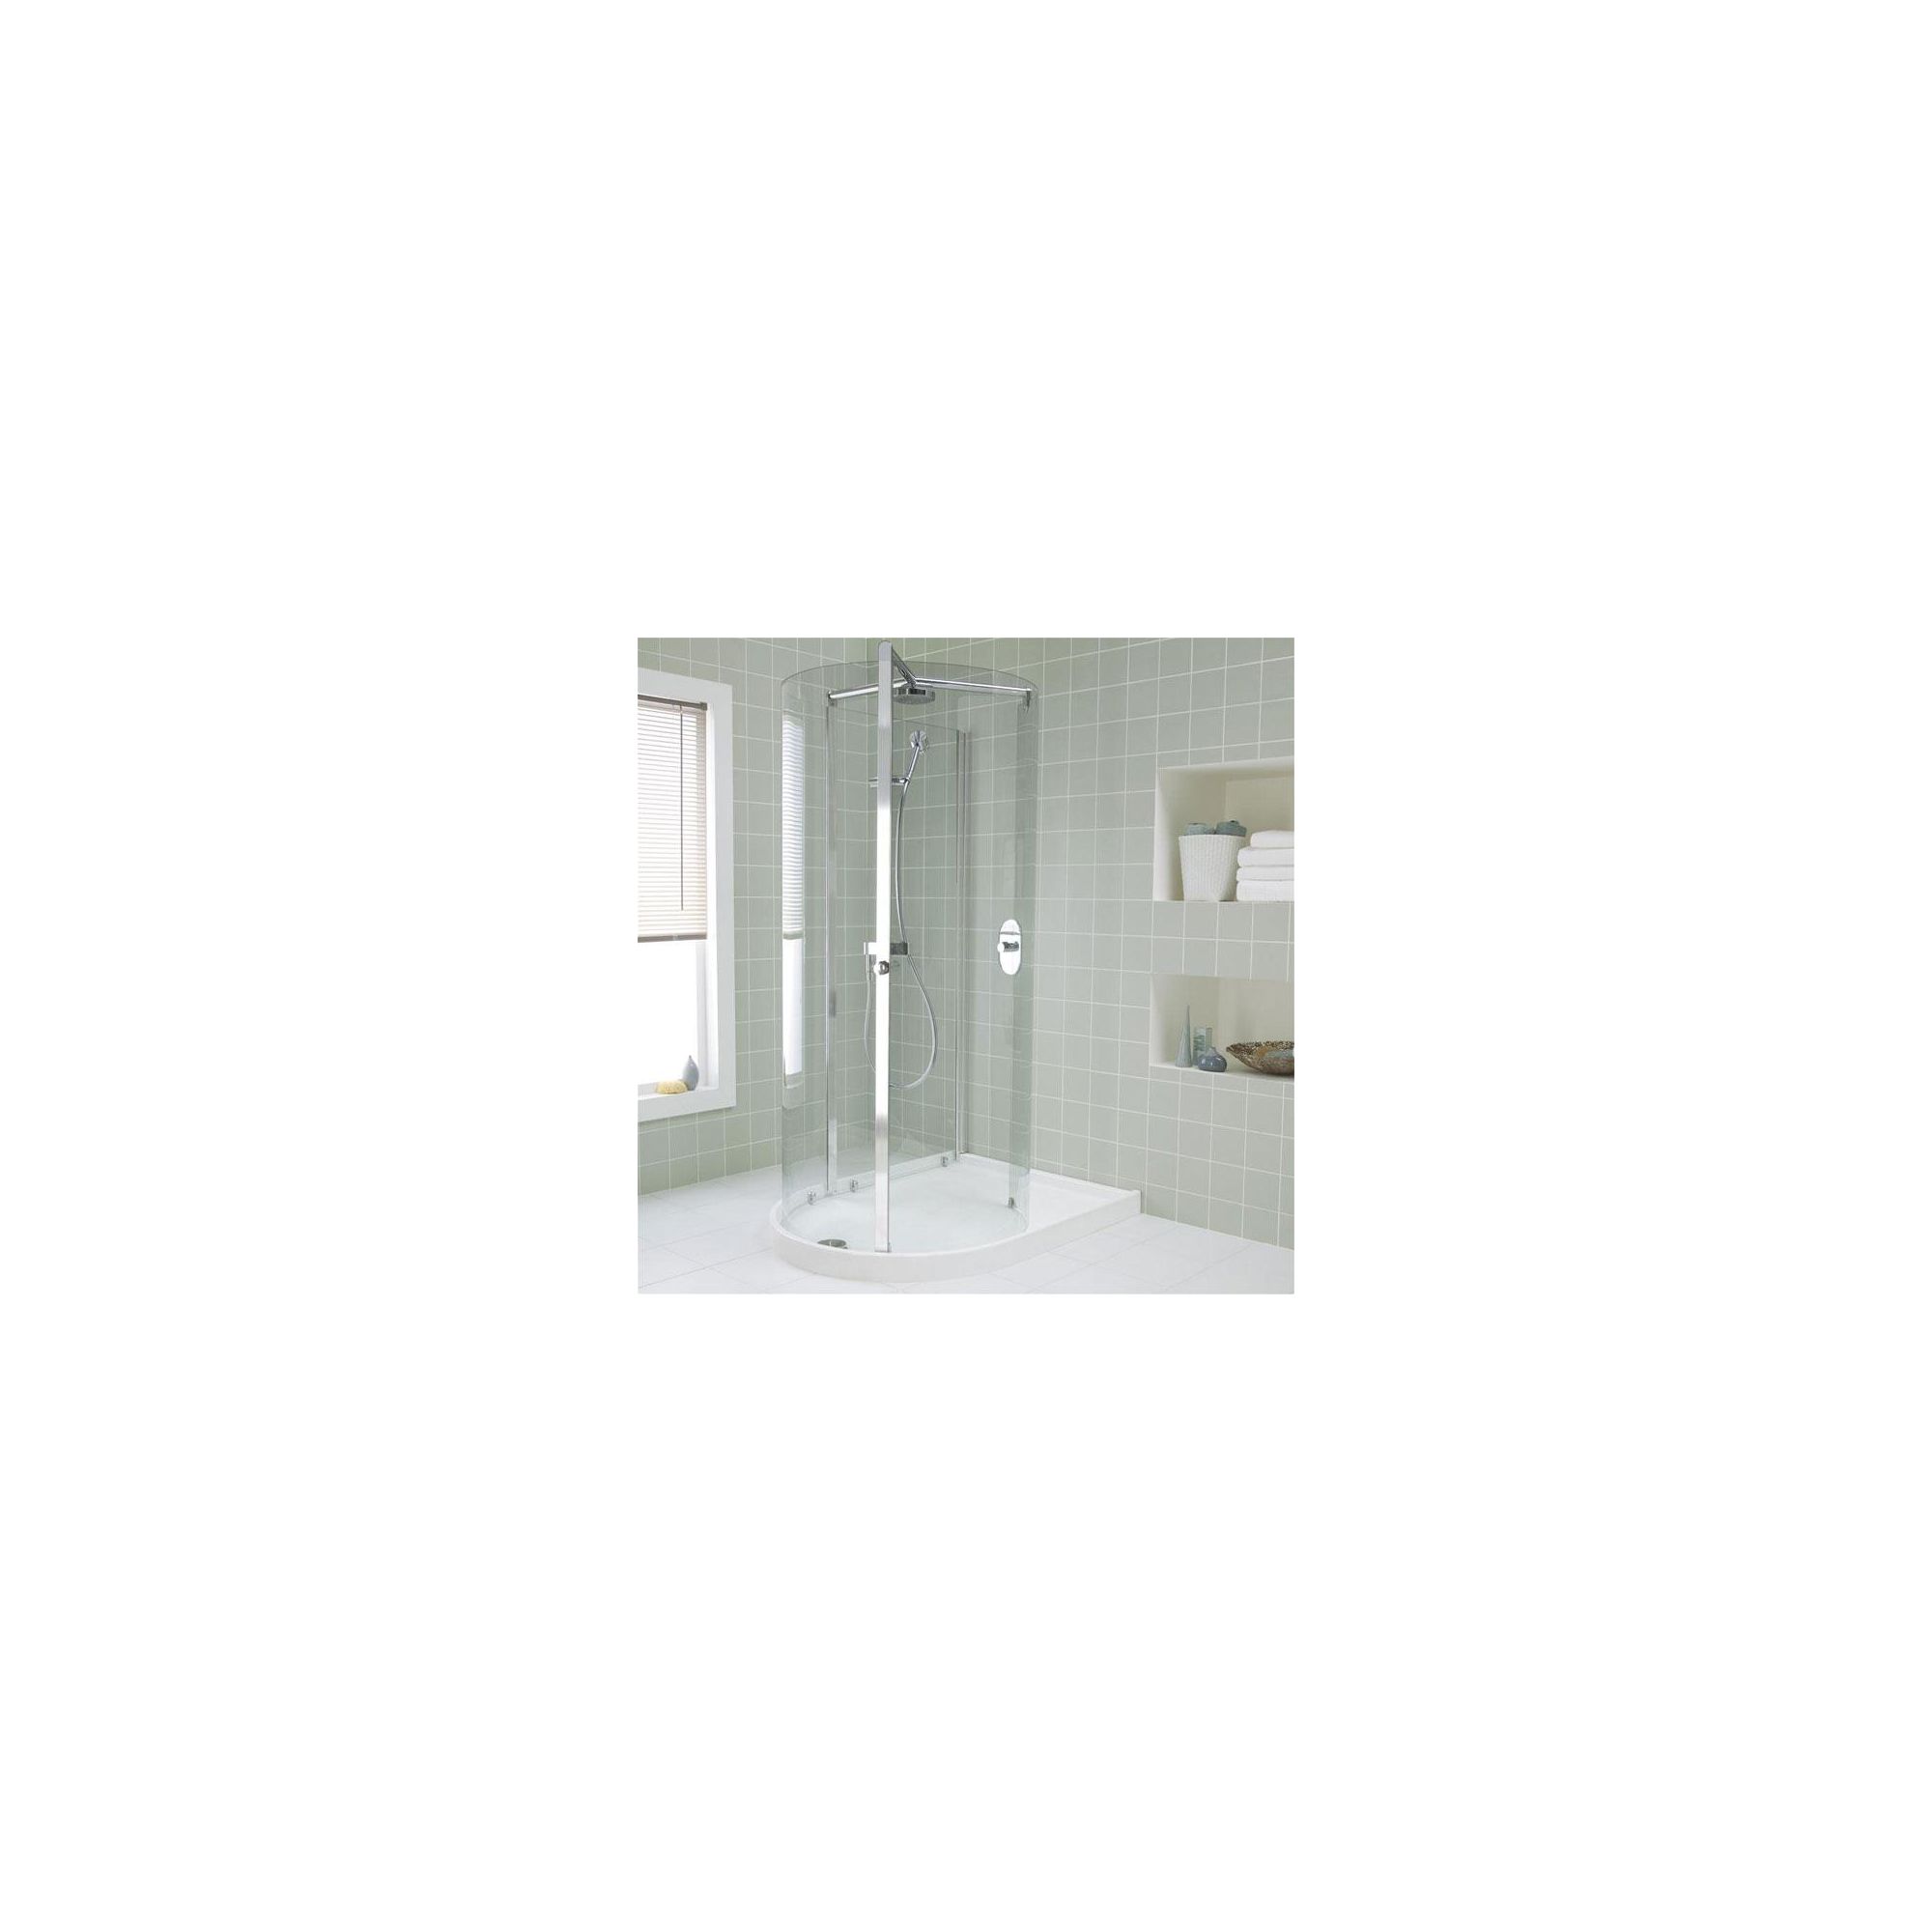 Ideal Standard Serenis Peninsular 360 Degree Shower Enclosure, including Fittings, 1532mm x 1100mm, Low Profile Tray, Right Handed at Tesco Direct